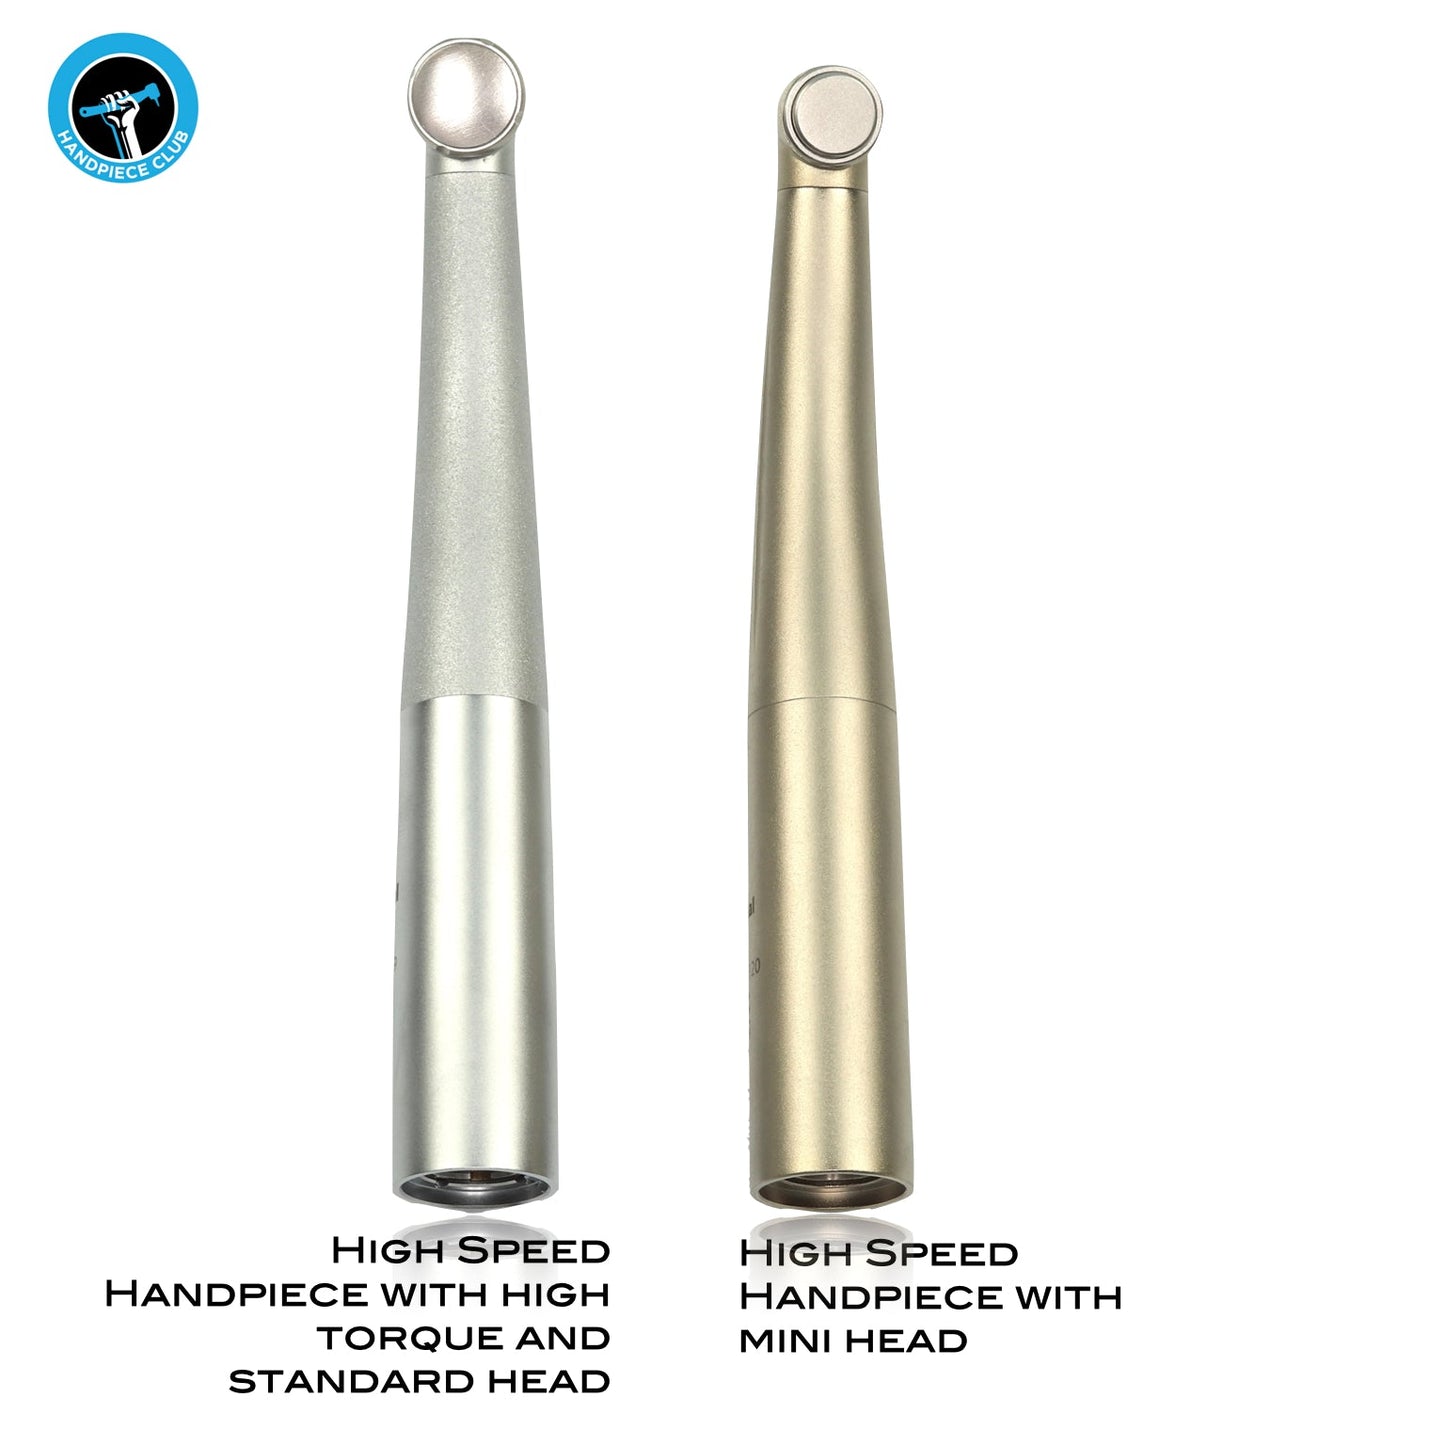 High Speed Handpiece with high torque and standard head (Kavo connection) - Incidental